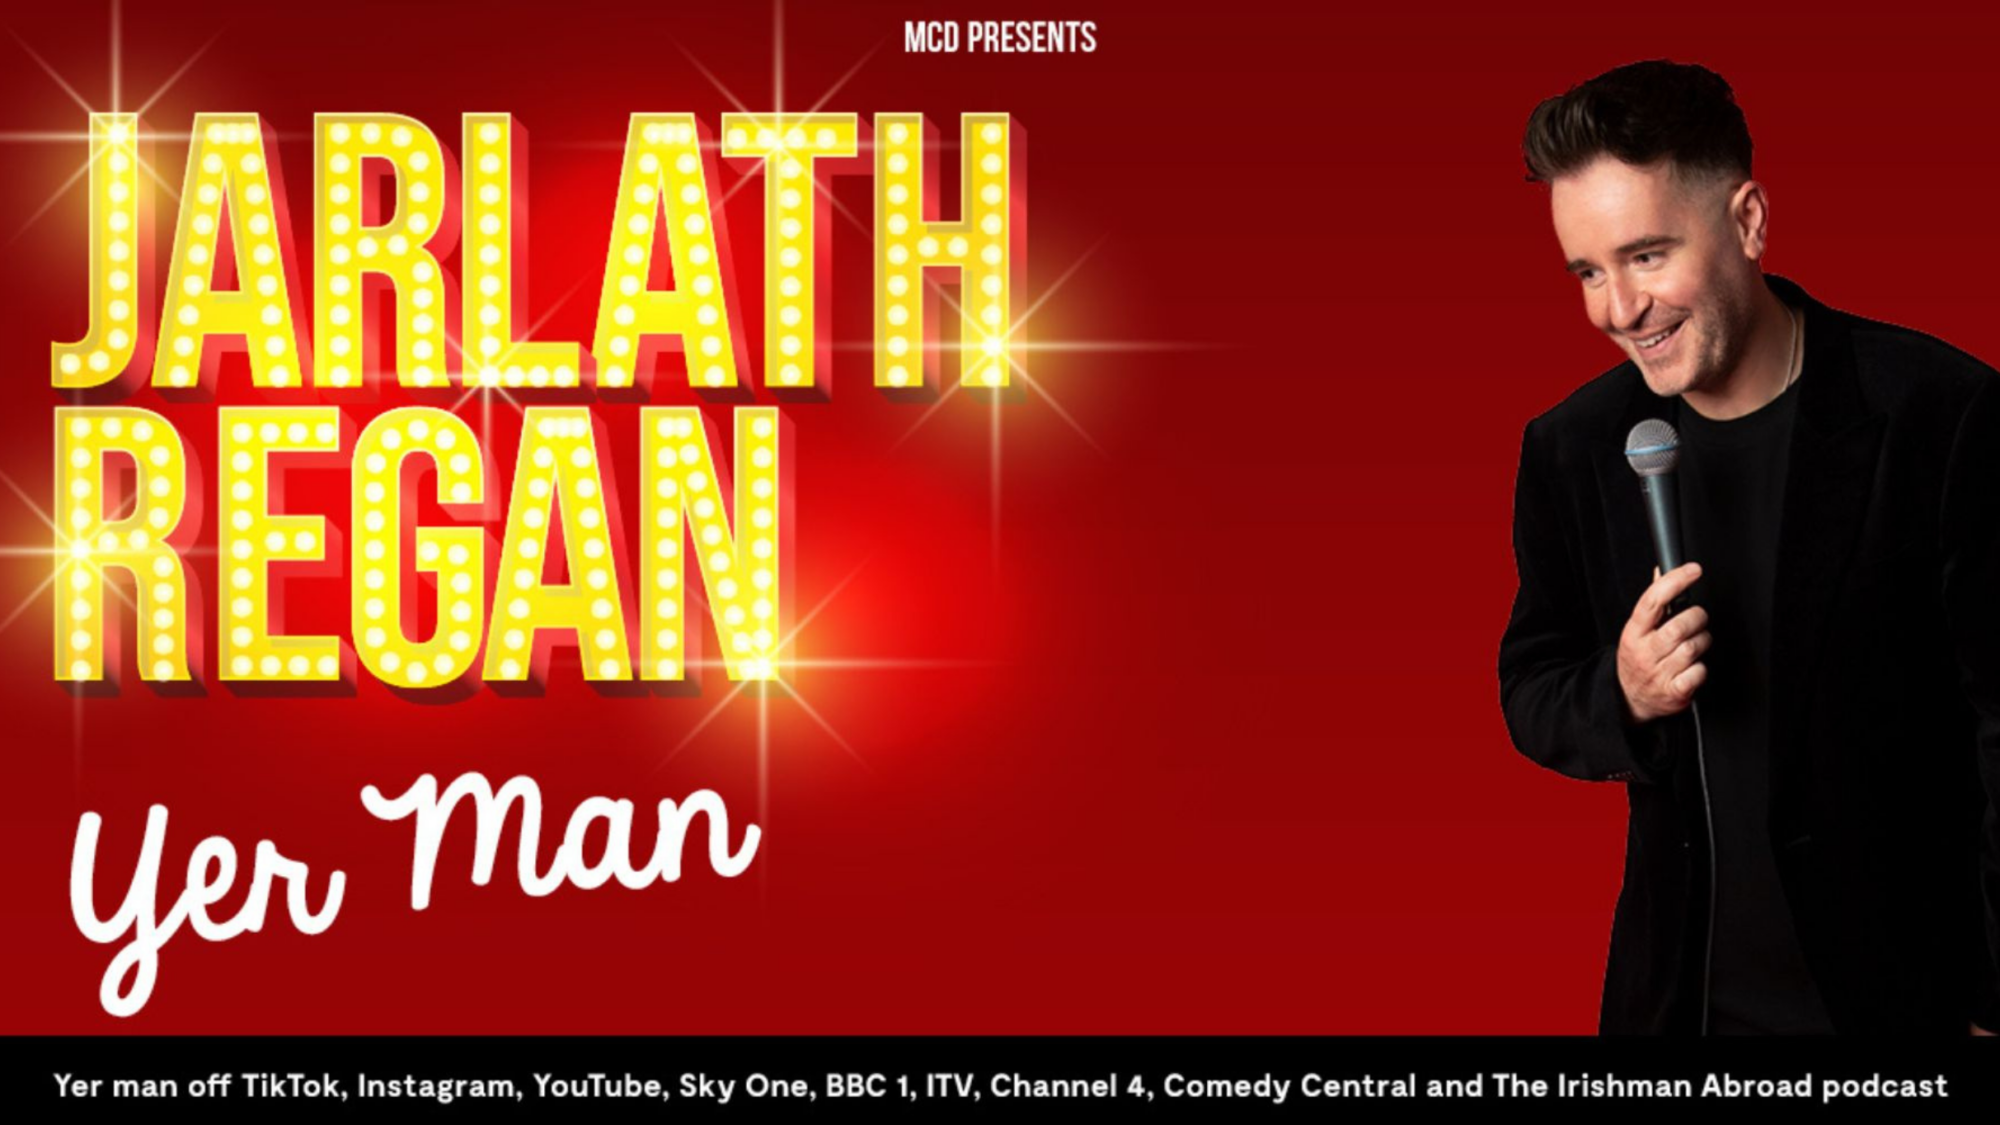 Image name Jarlath Regan Yer Man at Sheffield City Hall Memorial Hall Sheffield the 28 image from the post Jarlath Regan: Yer Man at Sheffield City Hall Memorial Hall, Sheffield in Yorkshire.com.